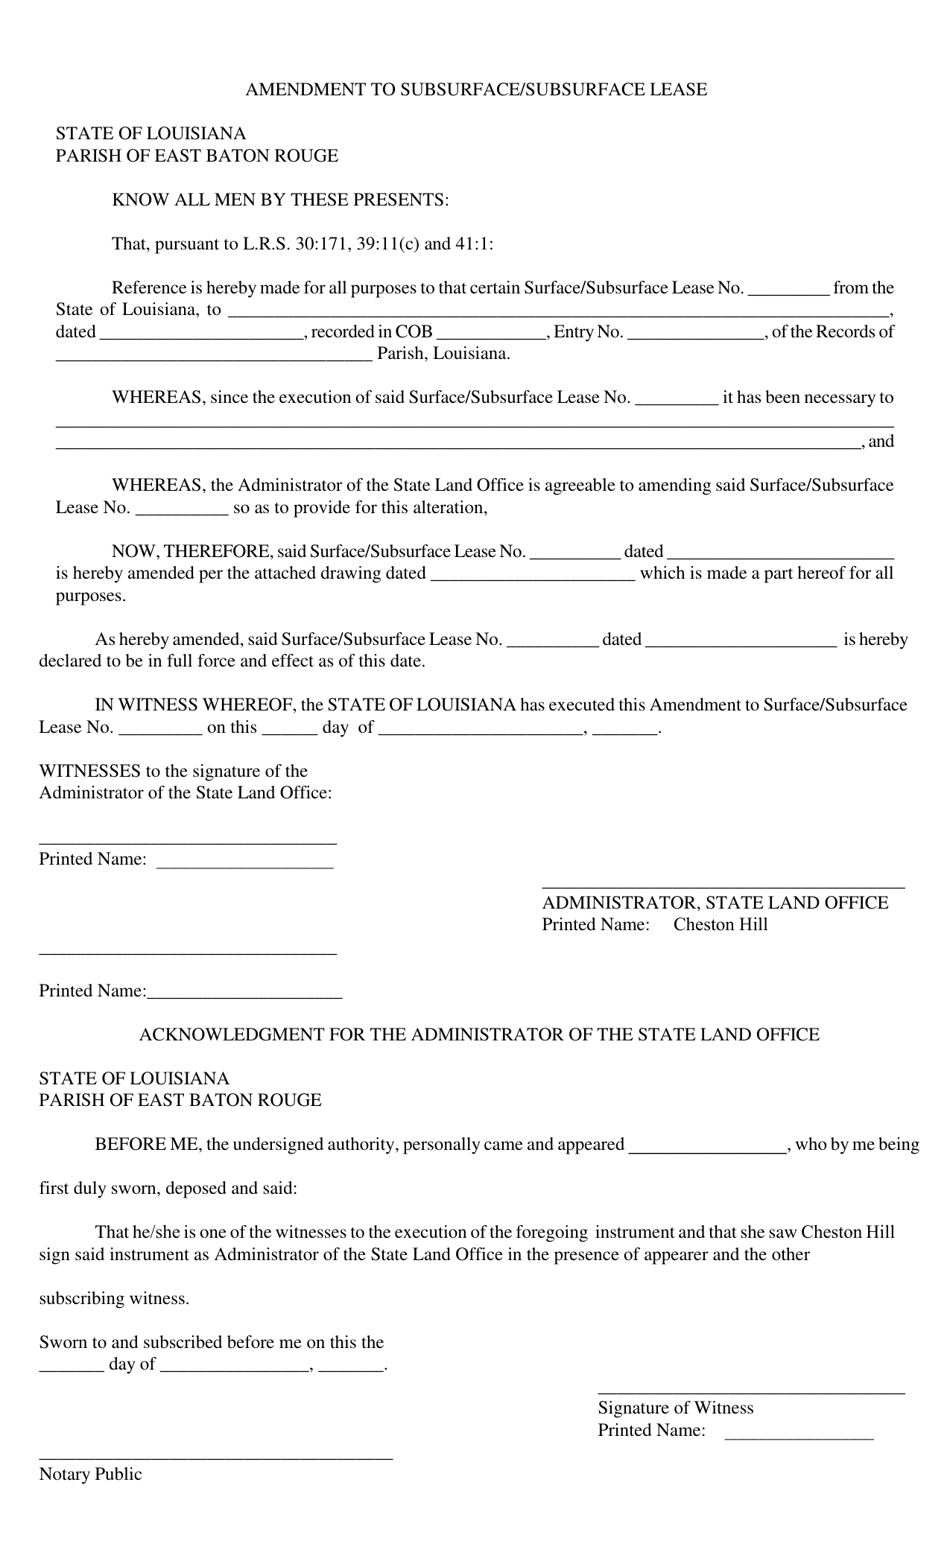 Amendment to Subsurface / Subsurface Lease - Louisiana, Page 1